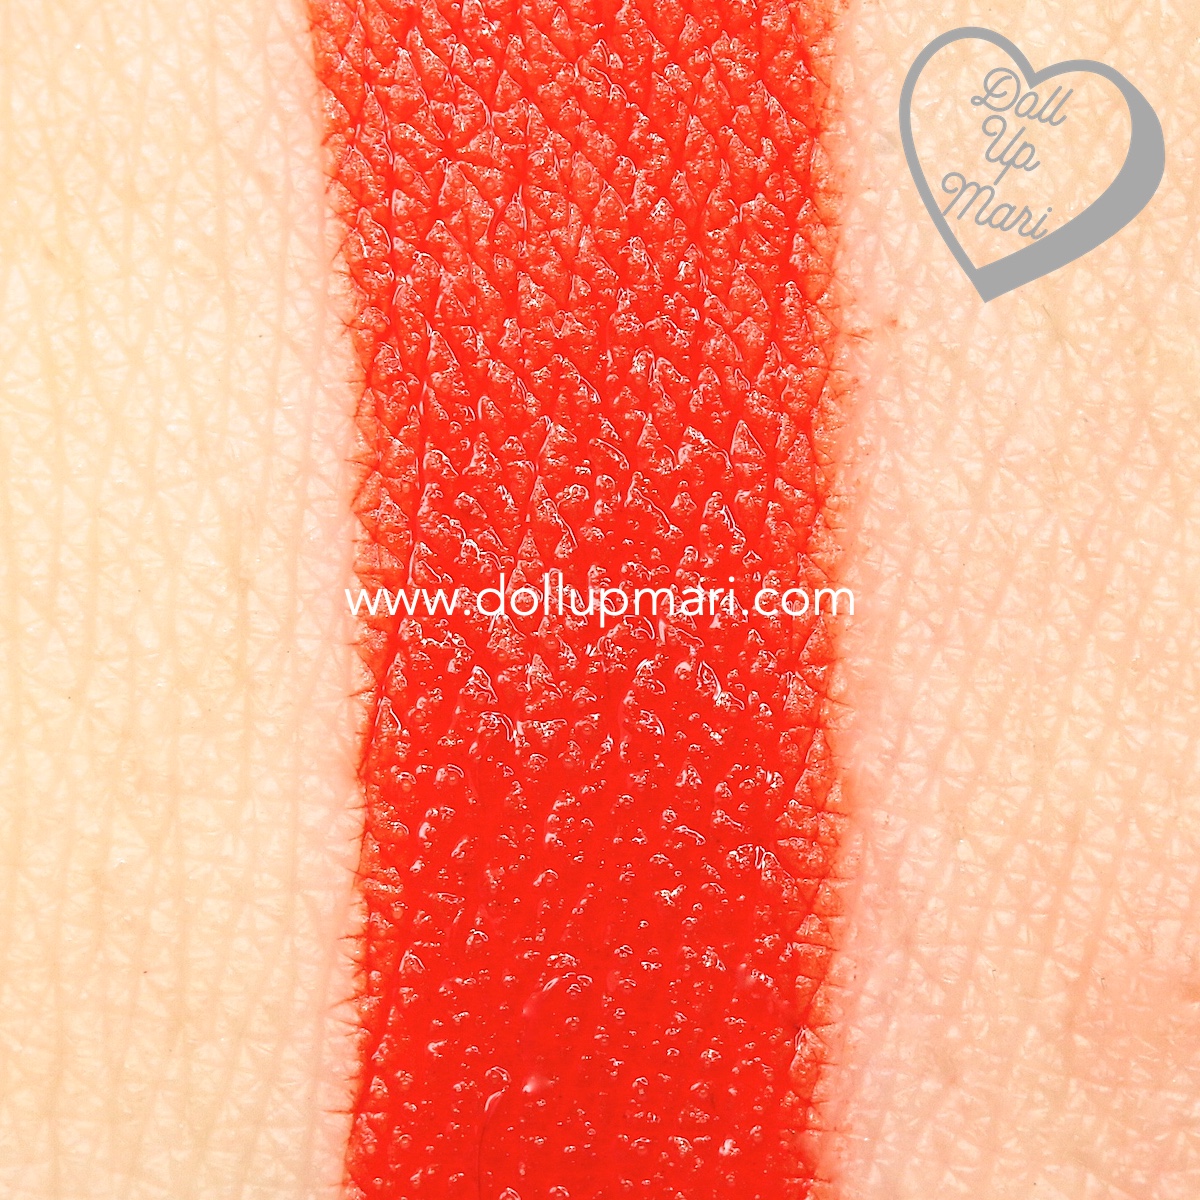 Swatch of 290 Standout shade of Maybelline Superstay Matte Ink Liquid Lipstick Rogue Reds